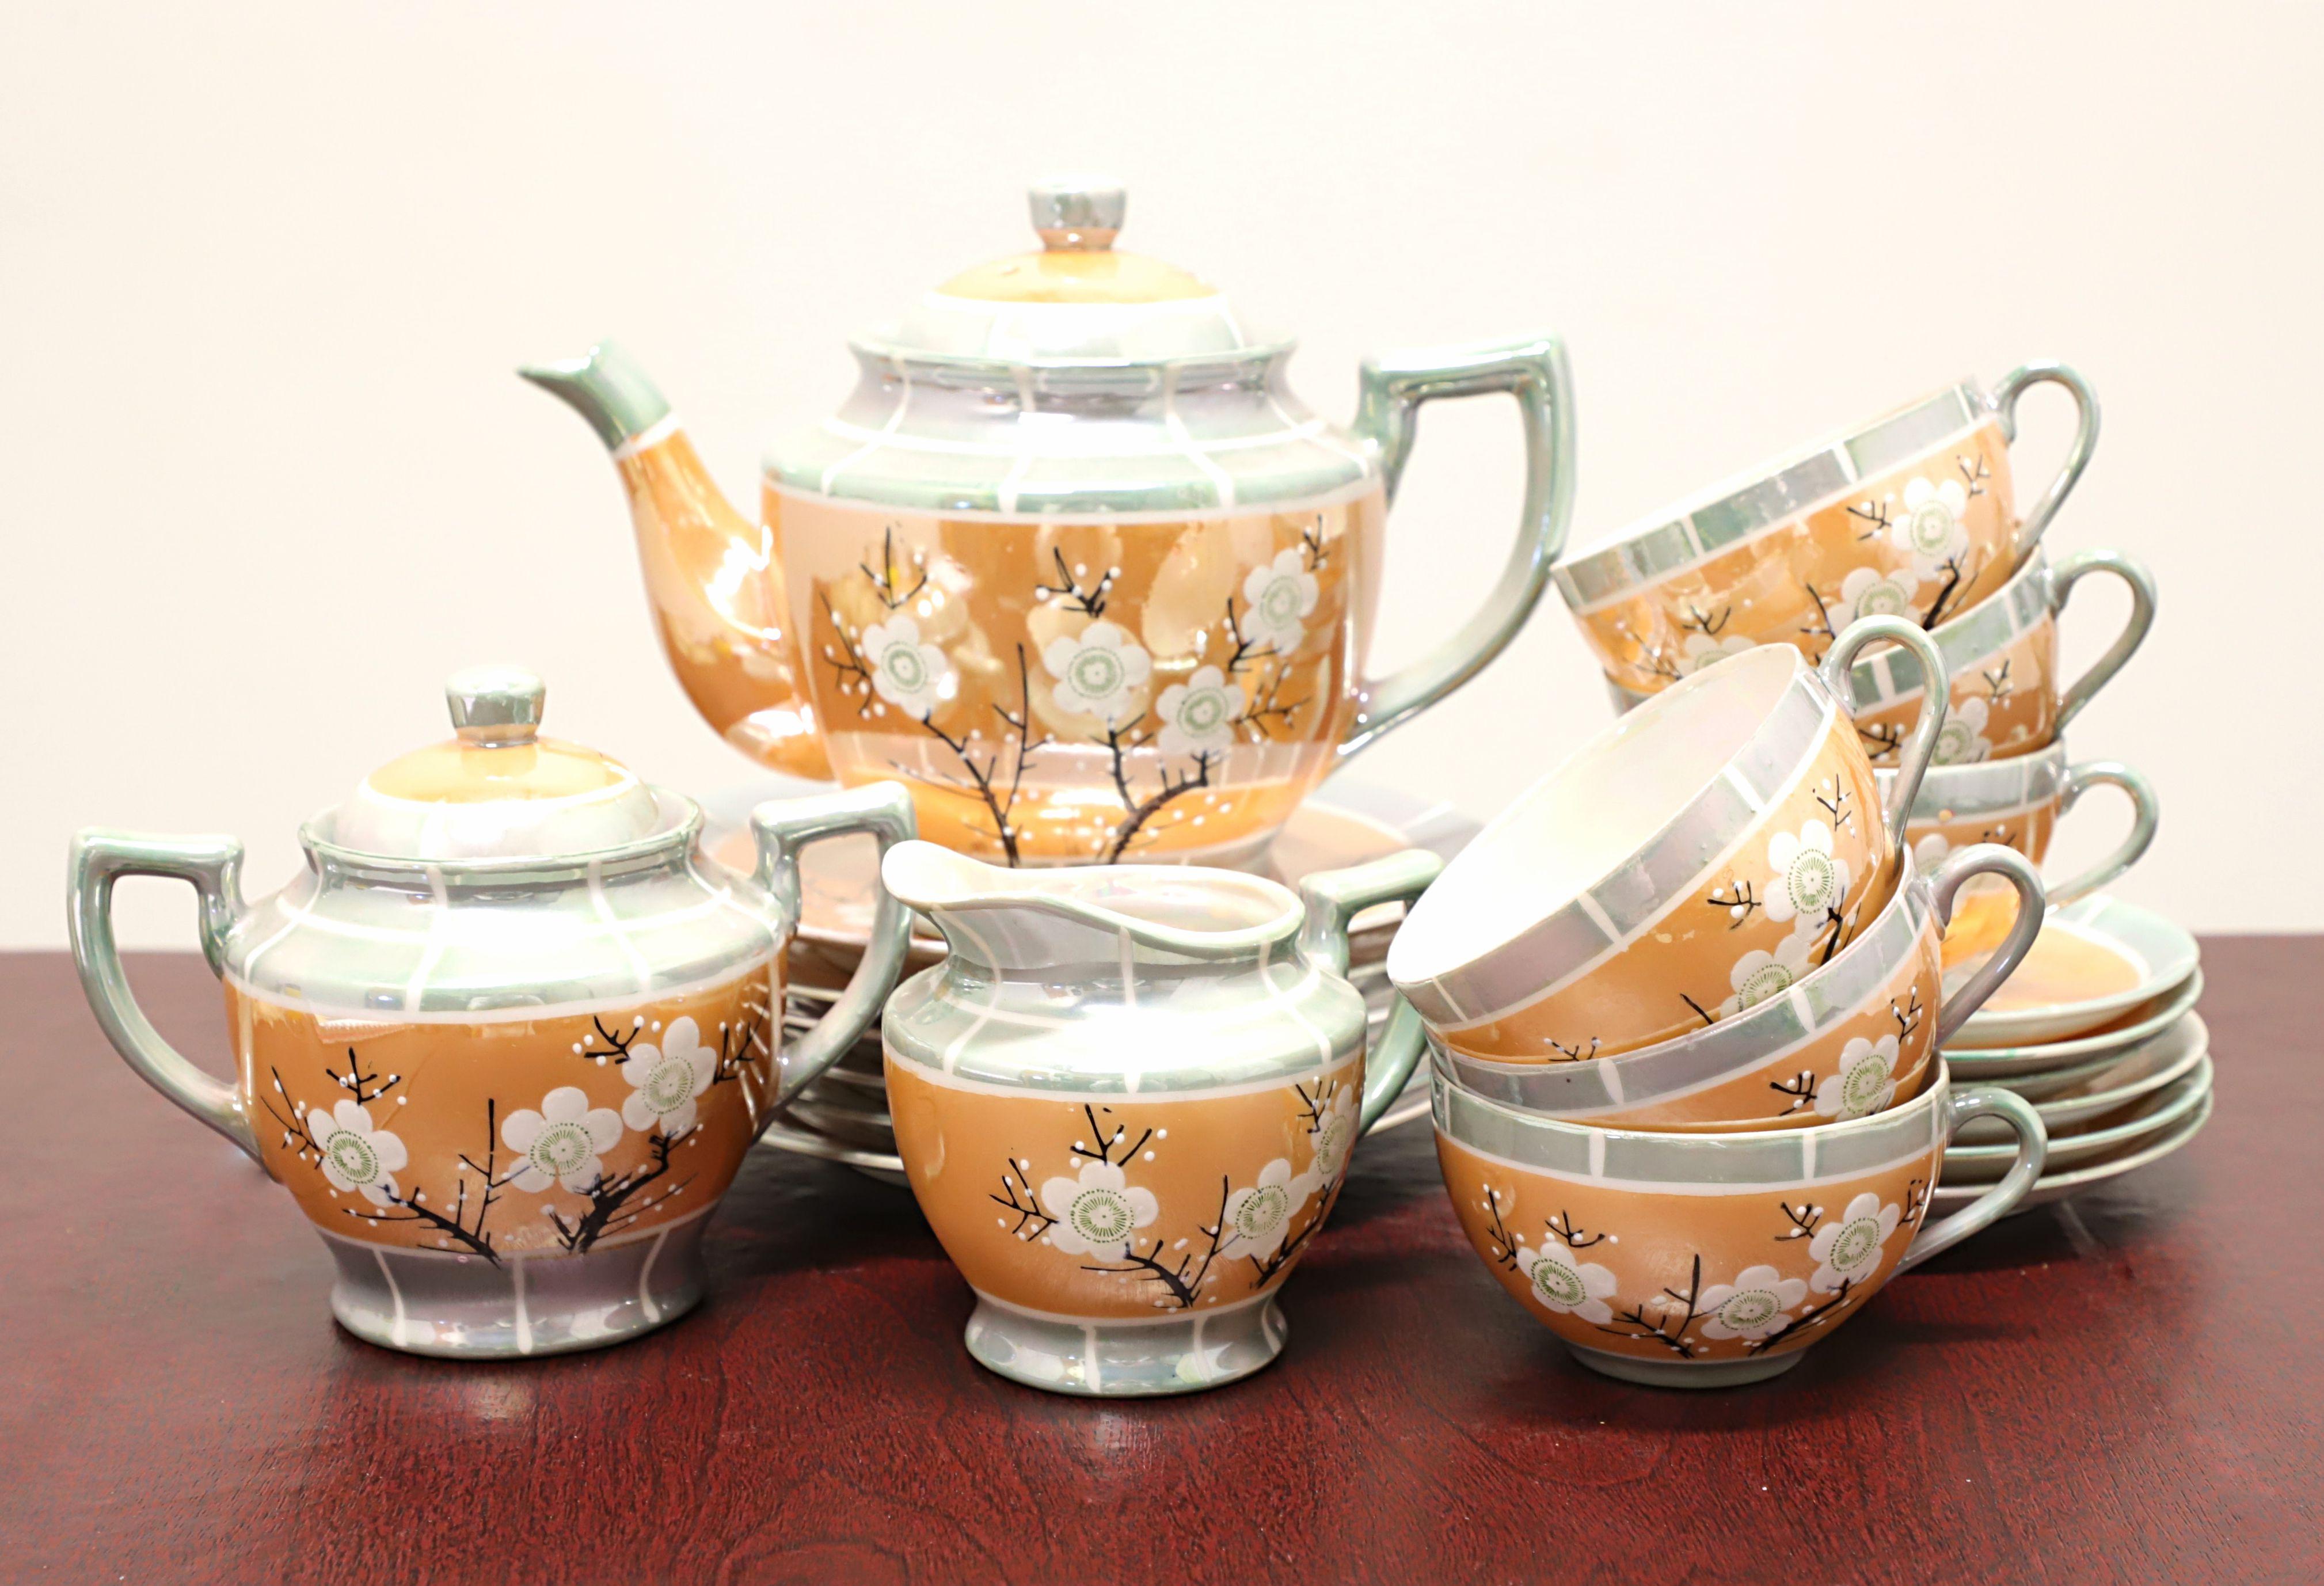 TAKITO Mid 20th Century Japanese Cherry Blossom Tea Service for Six - 21 Pieces For Sale 9